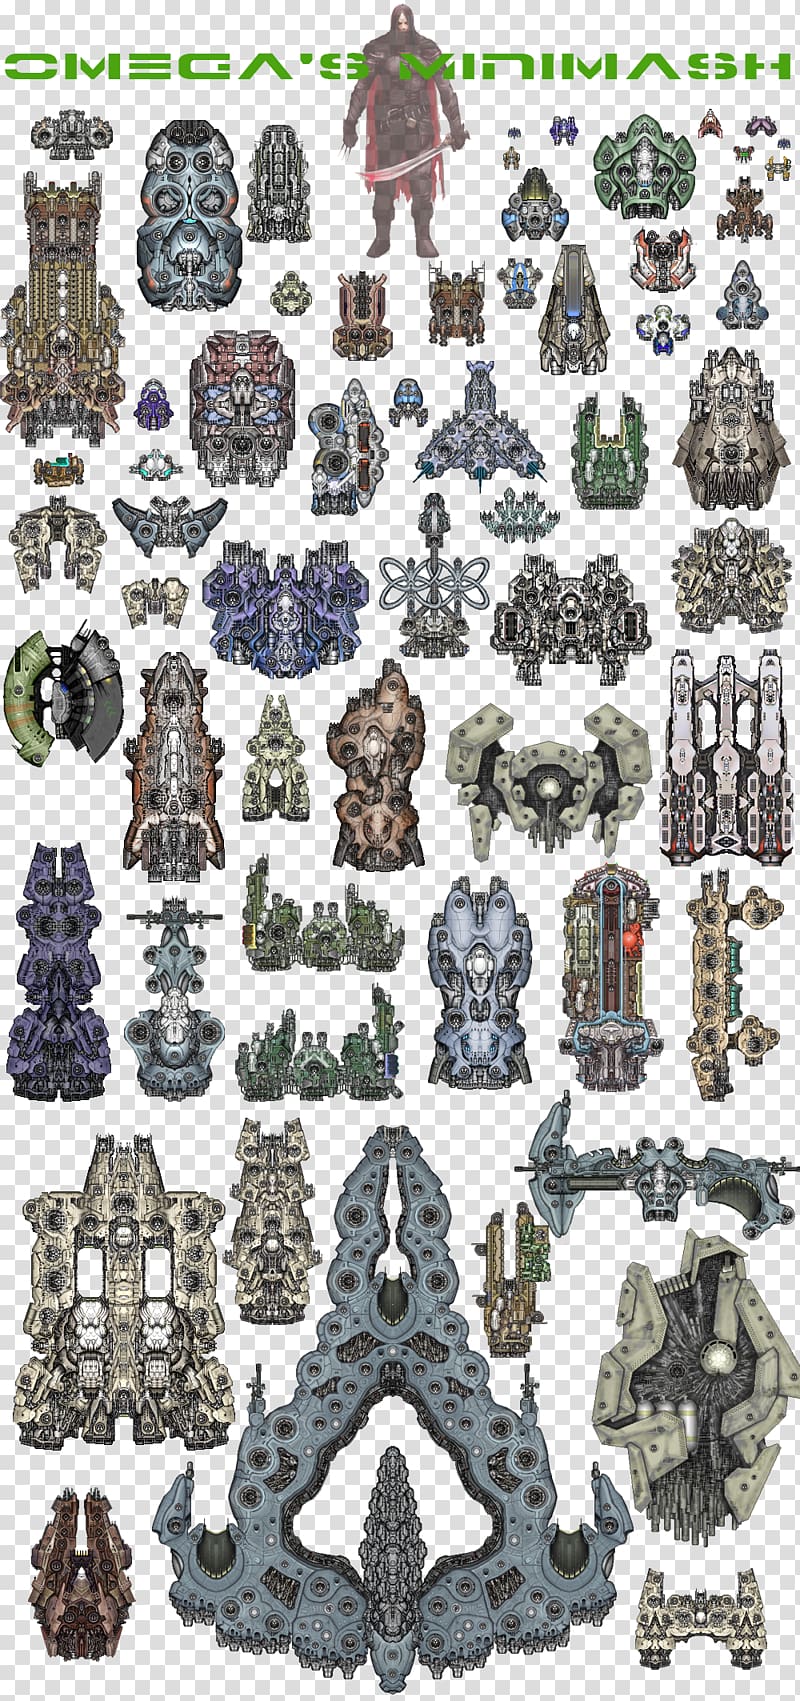 starsector game size